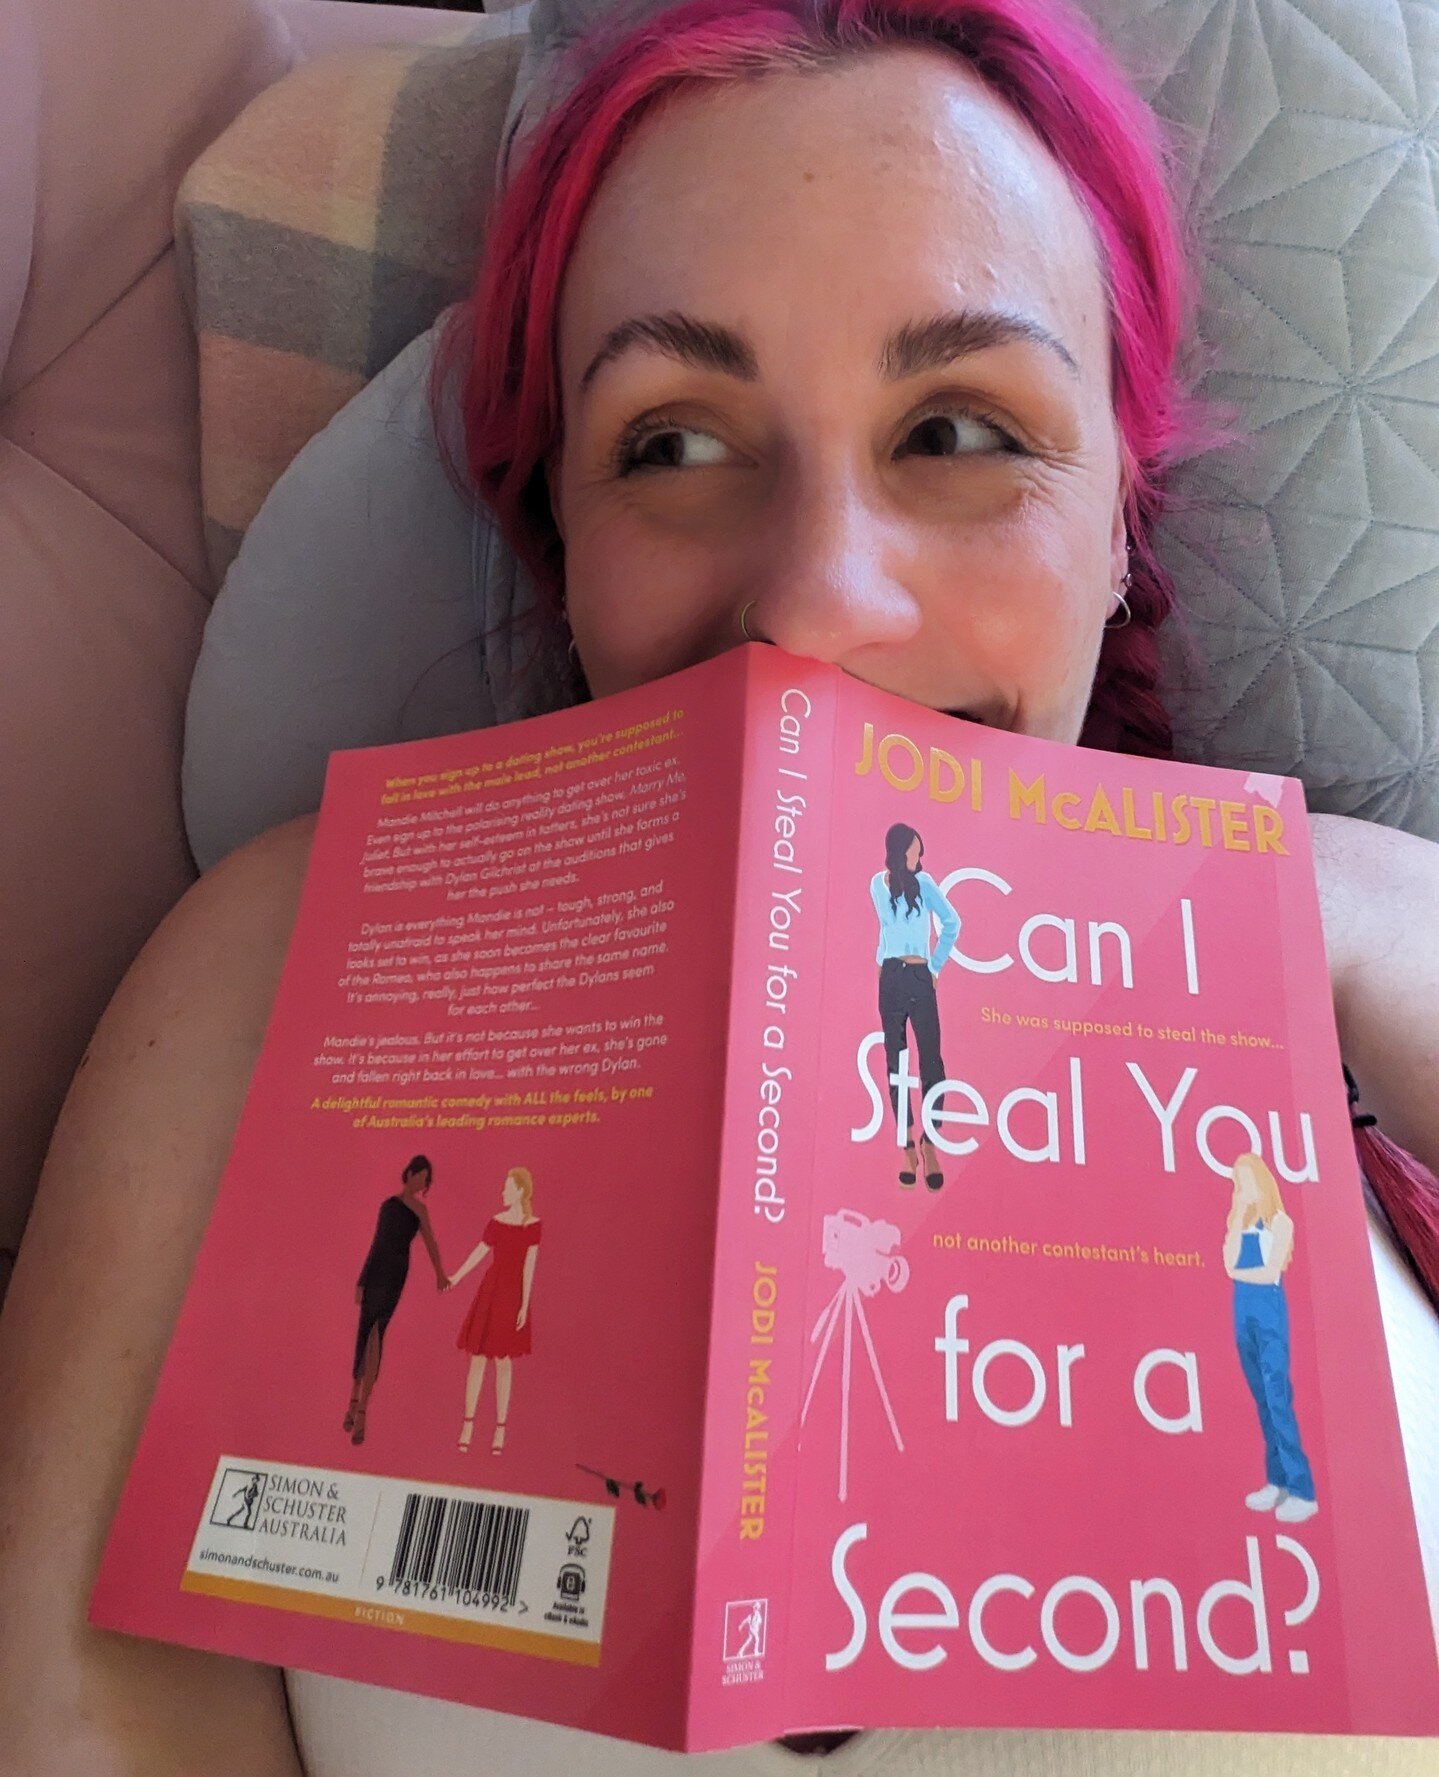 'Can I steal You For a Second?' by Jodi McAlister (@jodimcalister), published by Simon &amp; Schuster Australia (@simonschusterau)⁠
⁠
What did I think about this book? Well, here's the thing, I'm not gonna tell you. Instead, you can go find your loca